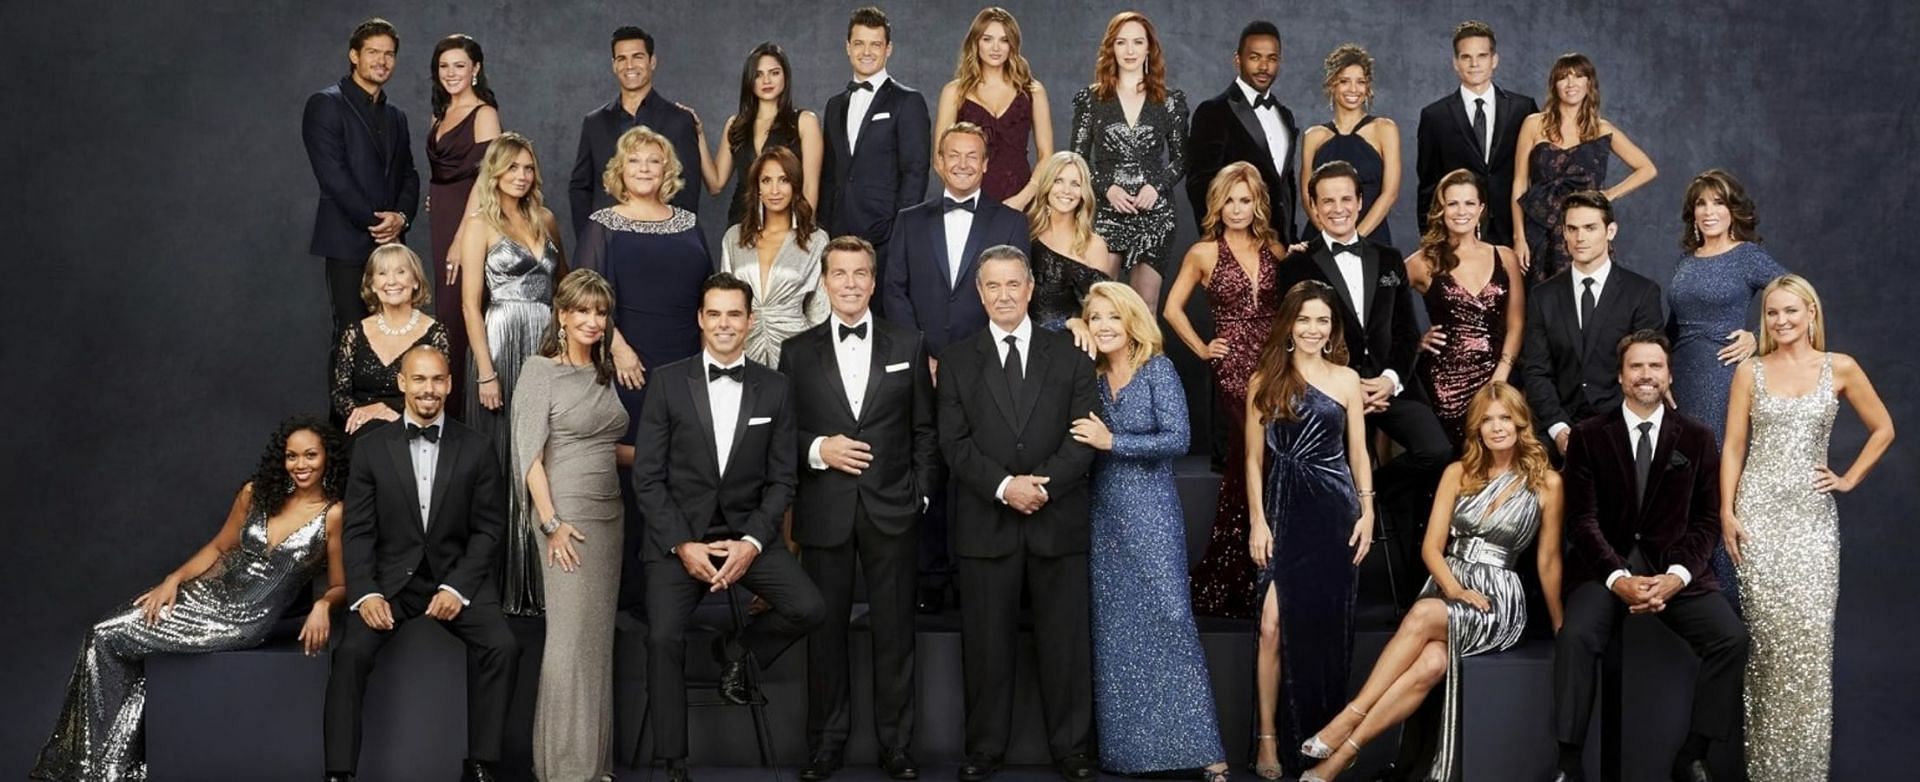 The cast of The Young and the Restless over the years (Image via IMDb)